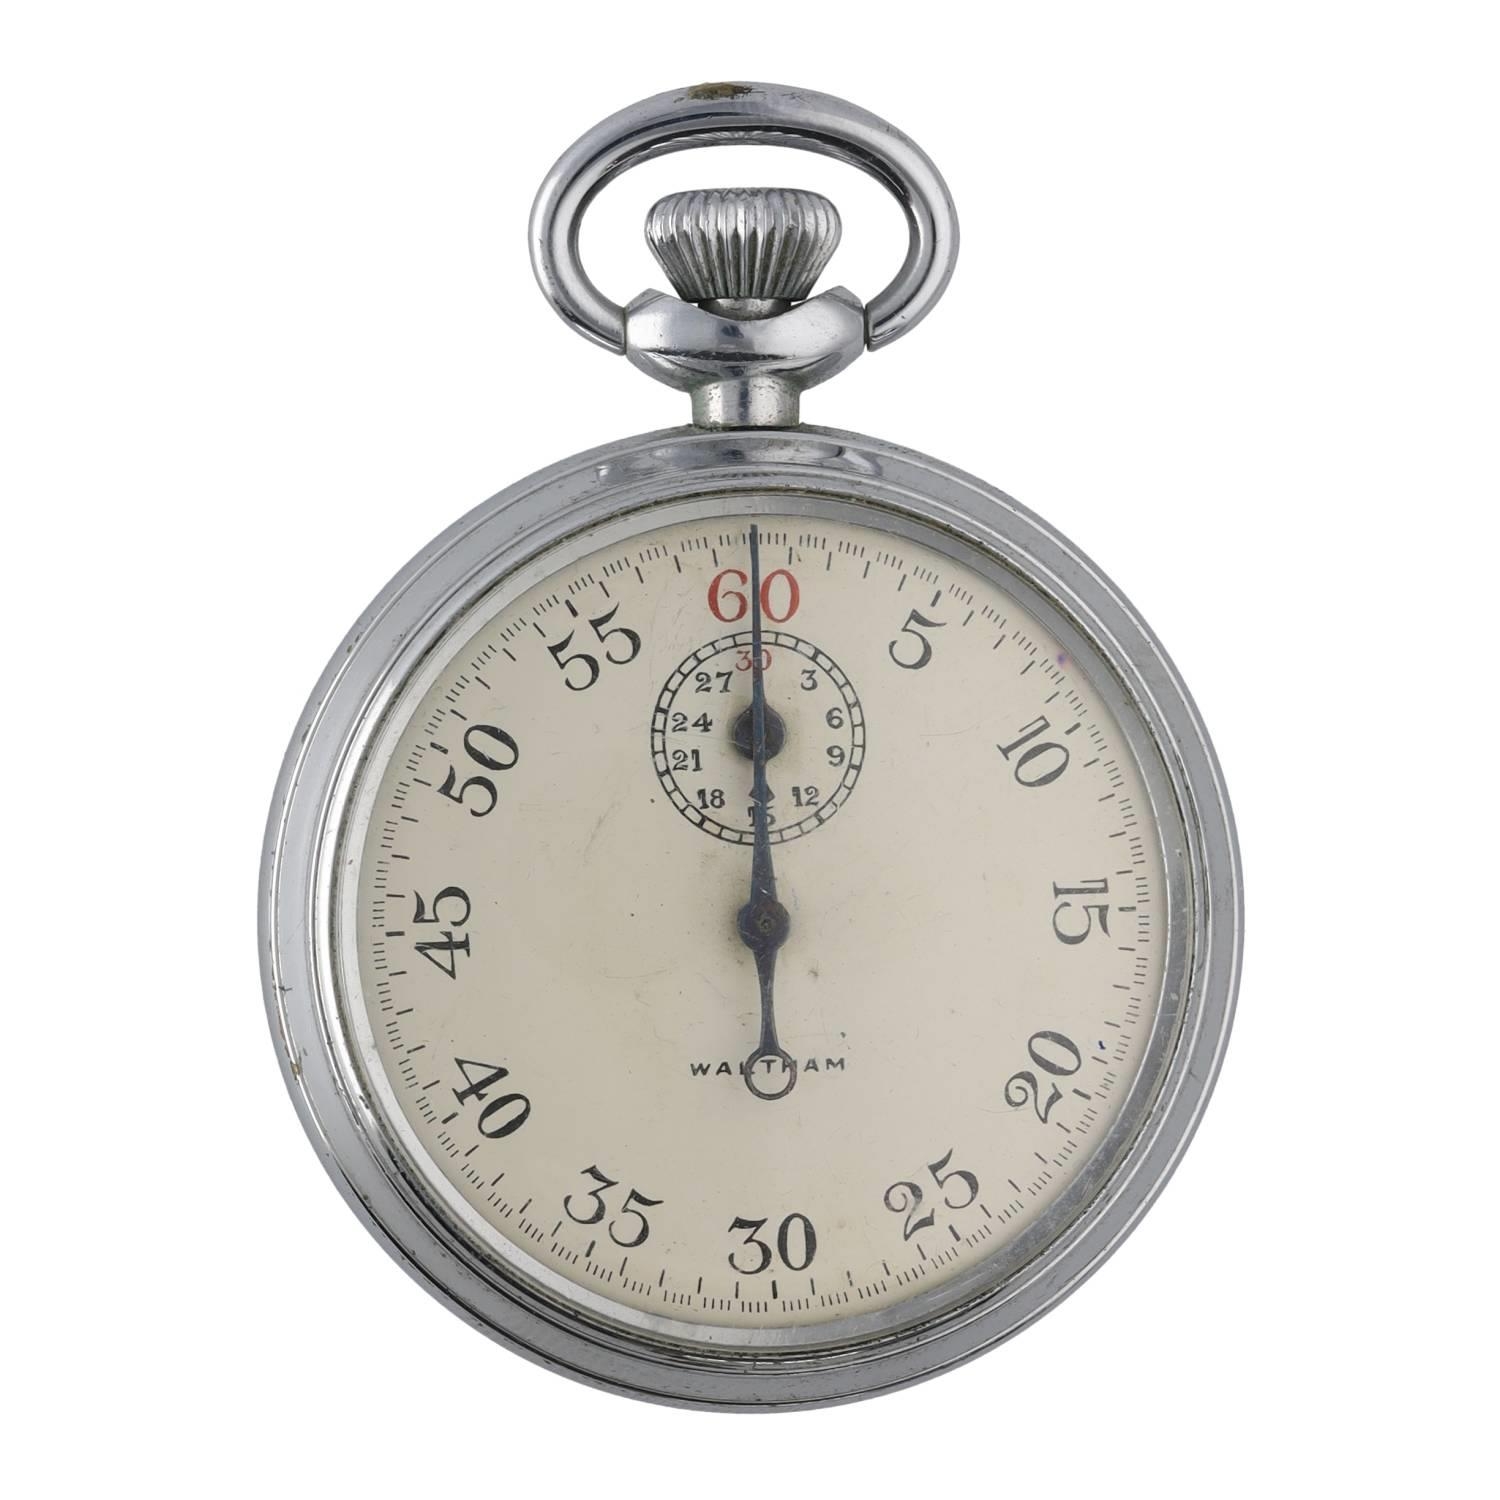 Waltham Military issue 1/5 SEC. T.P. chrome cased stopwatch, signed dial, the case stamped '^F181